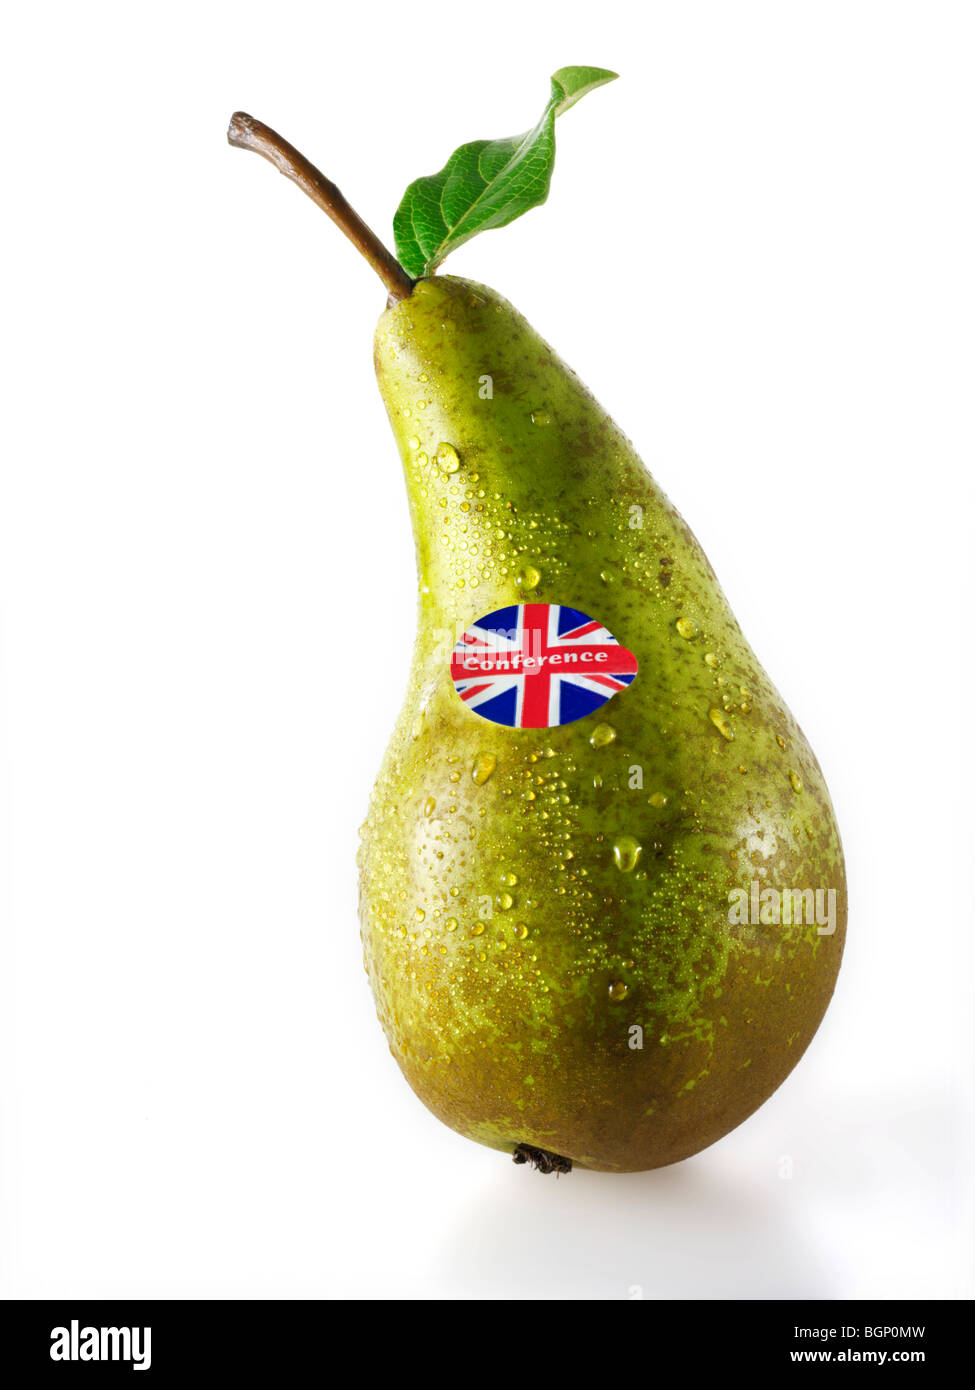 Whole Conference pear Stock Photo